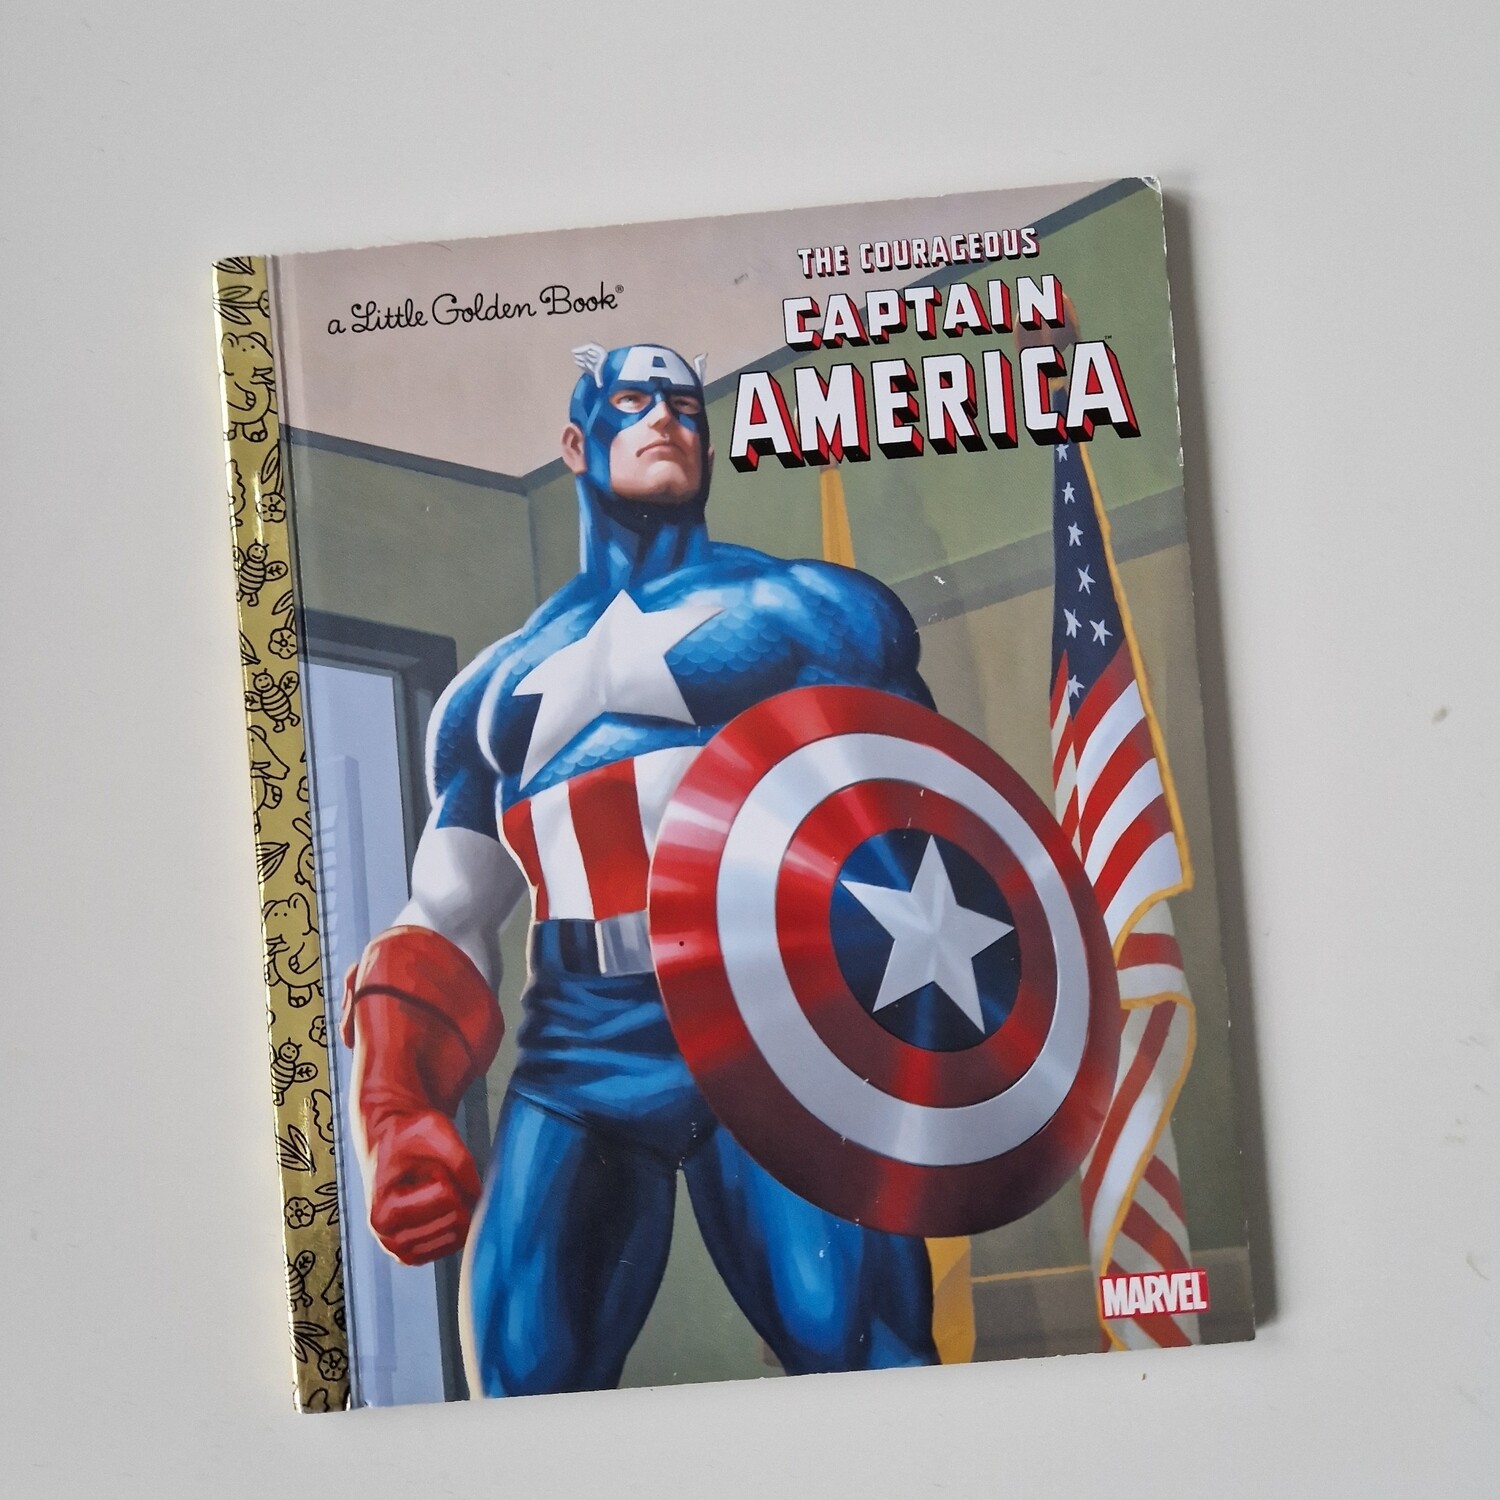 Captain America Notebook - board book will come with metal book corners included